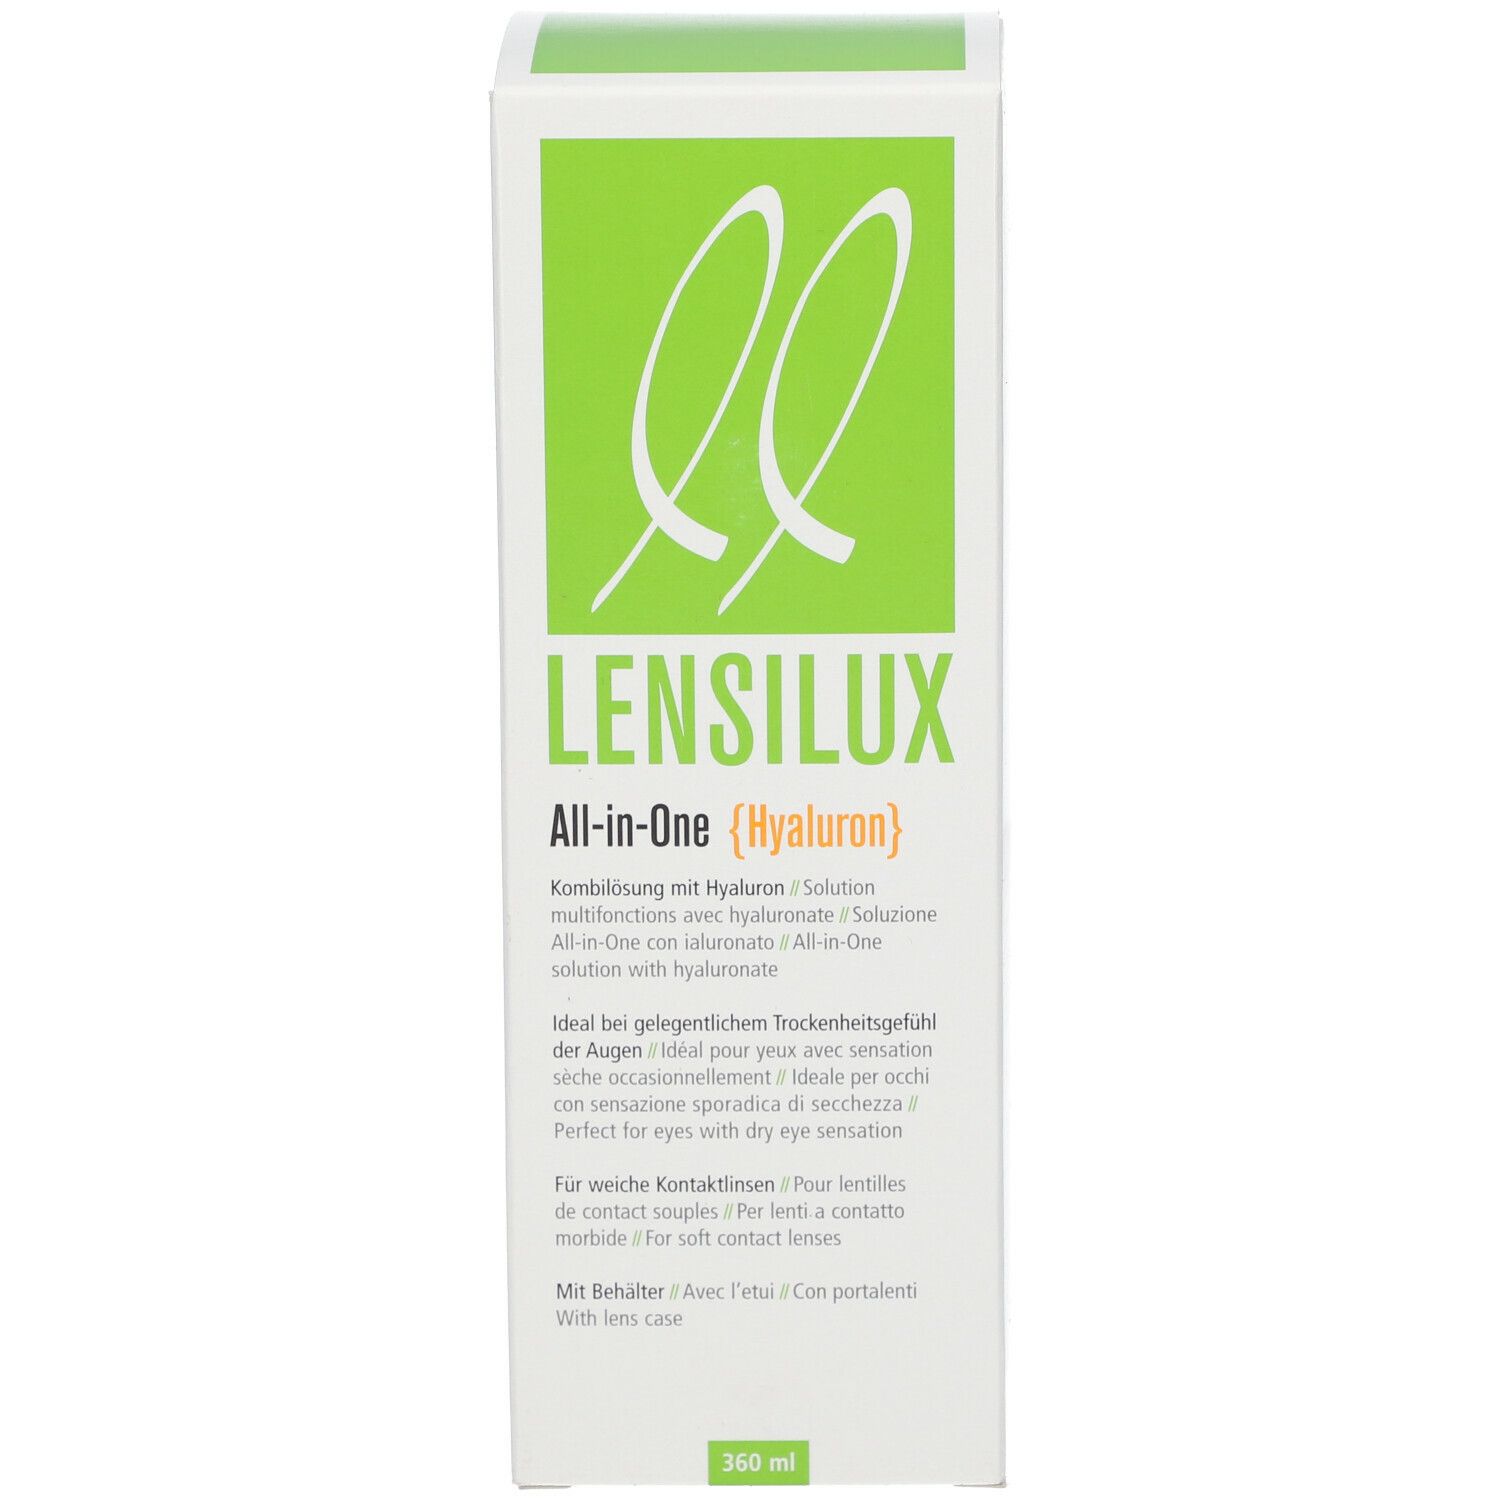 Lensilux All-in-One + Hyaluron